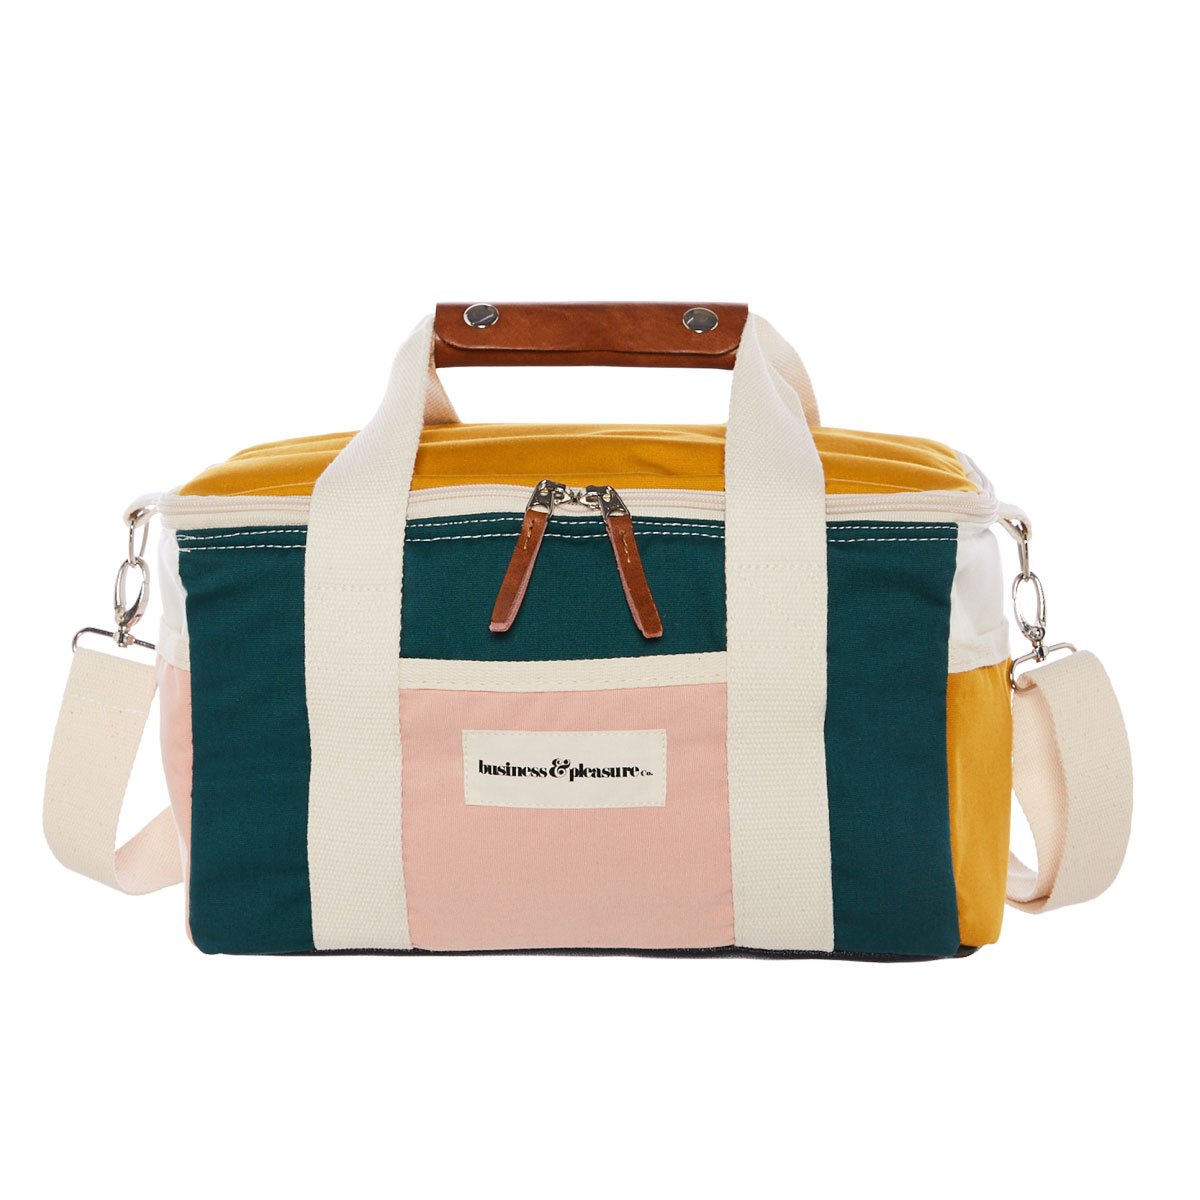 The Premium Cooler Bag - Business and Pleasure Co